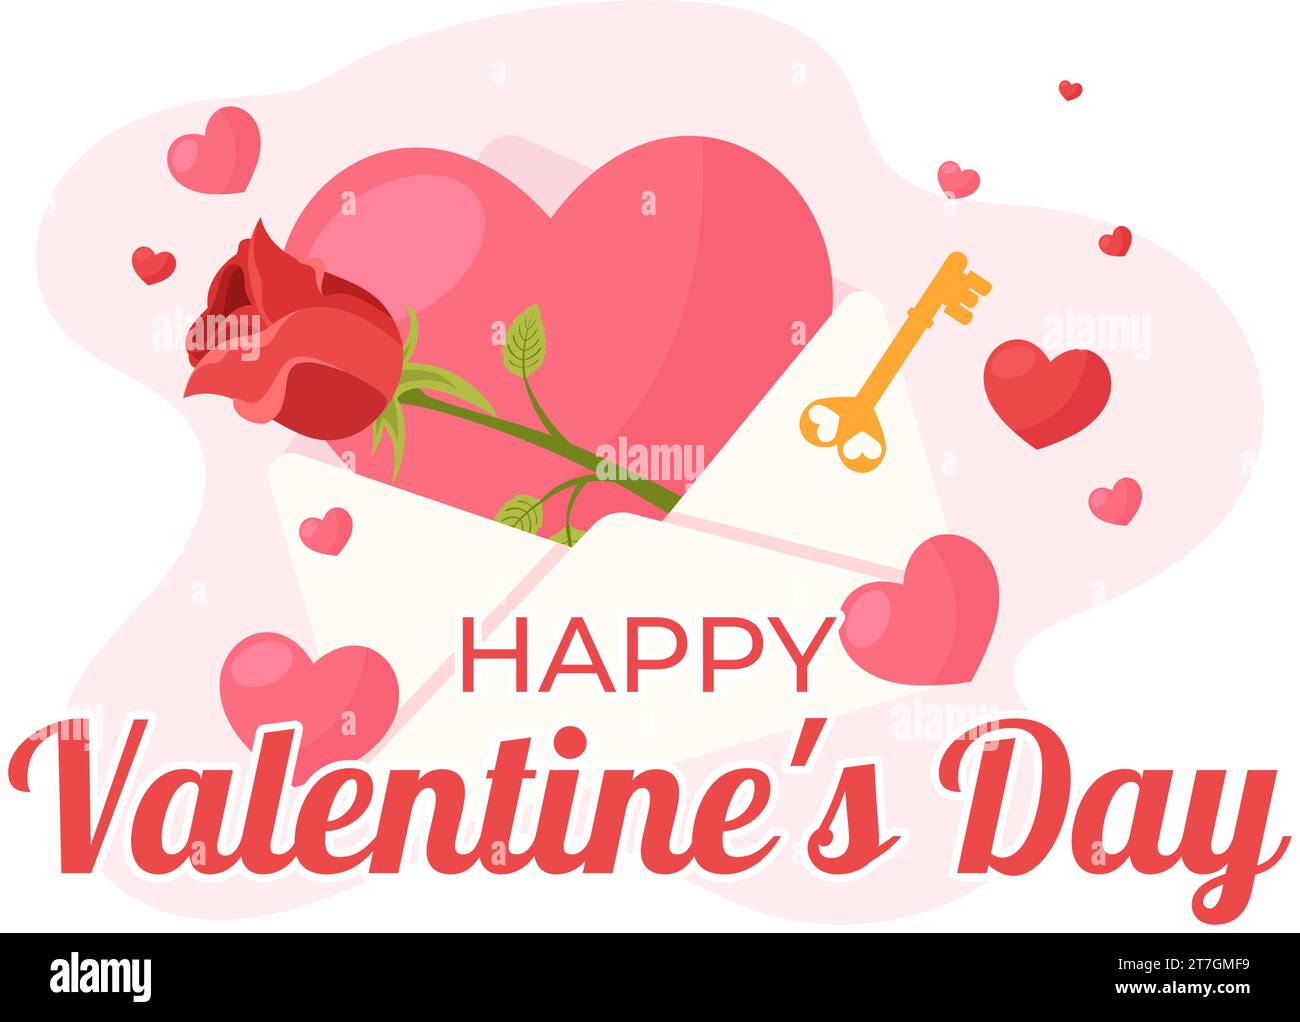 Happy Valentine's Day Vector Illustration on February 14 with Heart or Love for Couple Affection in Flat Valentine Holiday Cartoon Pink Background Stock Vector